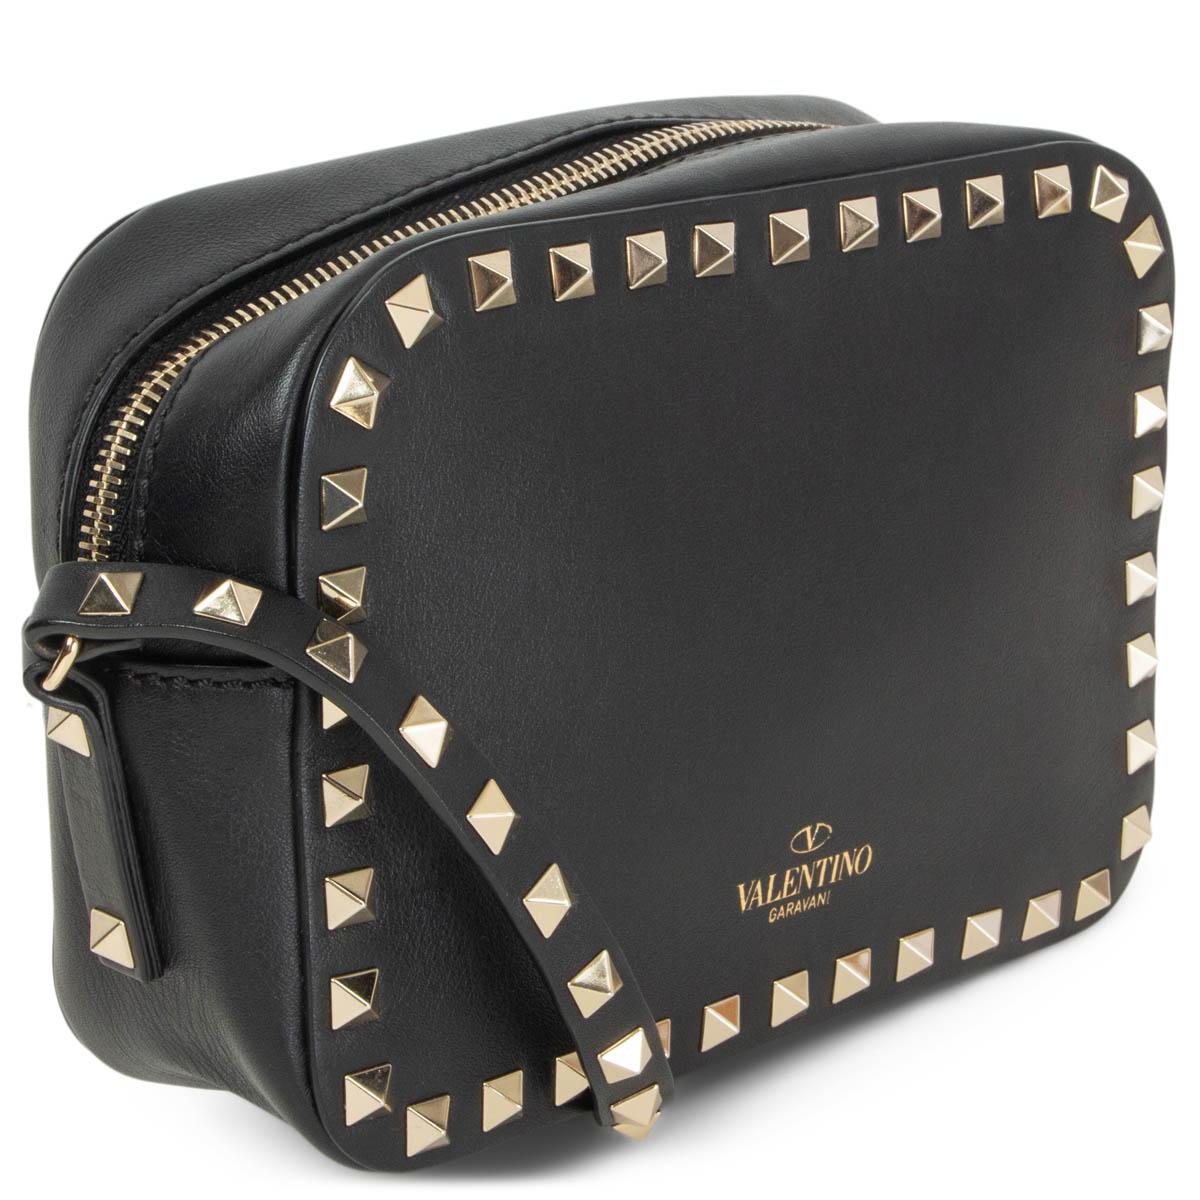 100% authentic Valentino Rockstud mini camera cross body camera bag in black leather with light gold-tone singnature  studs. Opens with a zipper on top and is lined in black canvas with one open pocket against the back. Has a adjustable shoulder